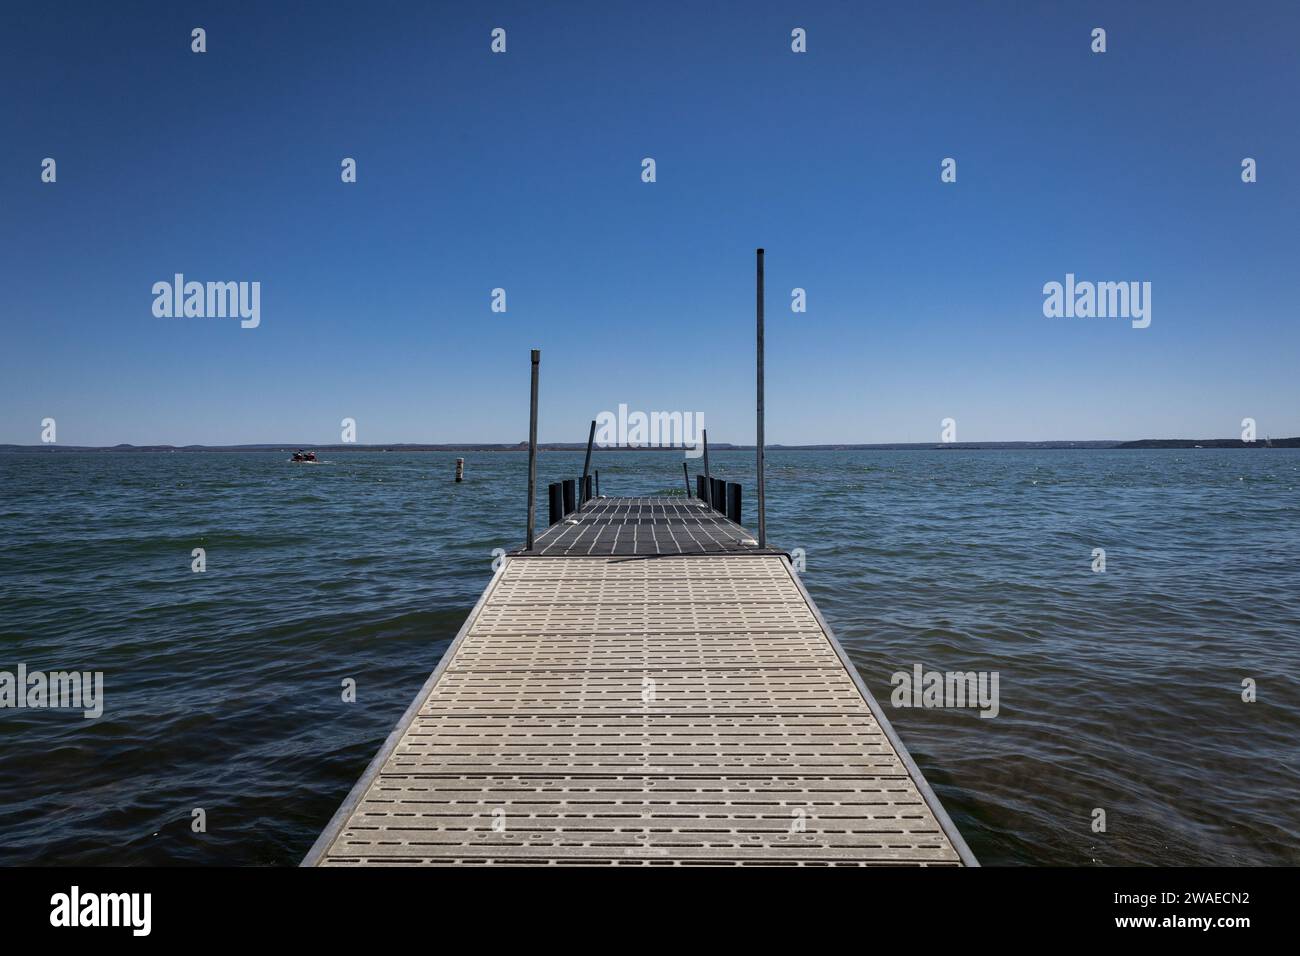 A wooden boat docking pier in a tranquil lake in Texas with a cloudless, brilliant blue sky overhead Stock Photo